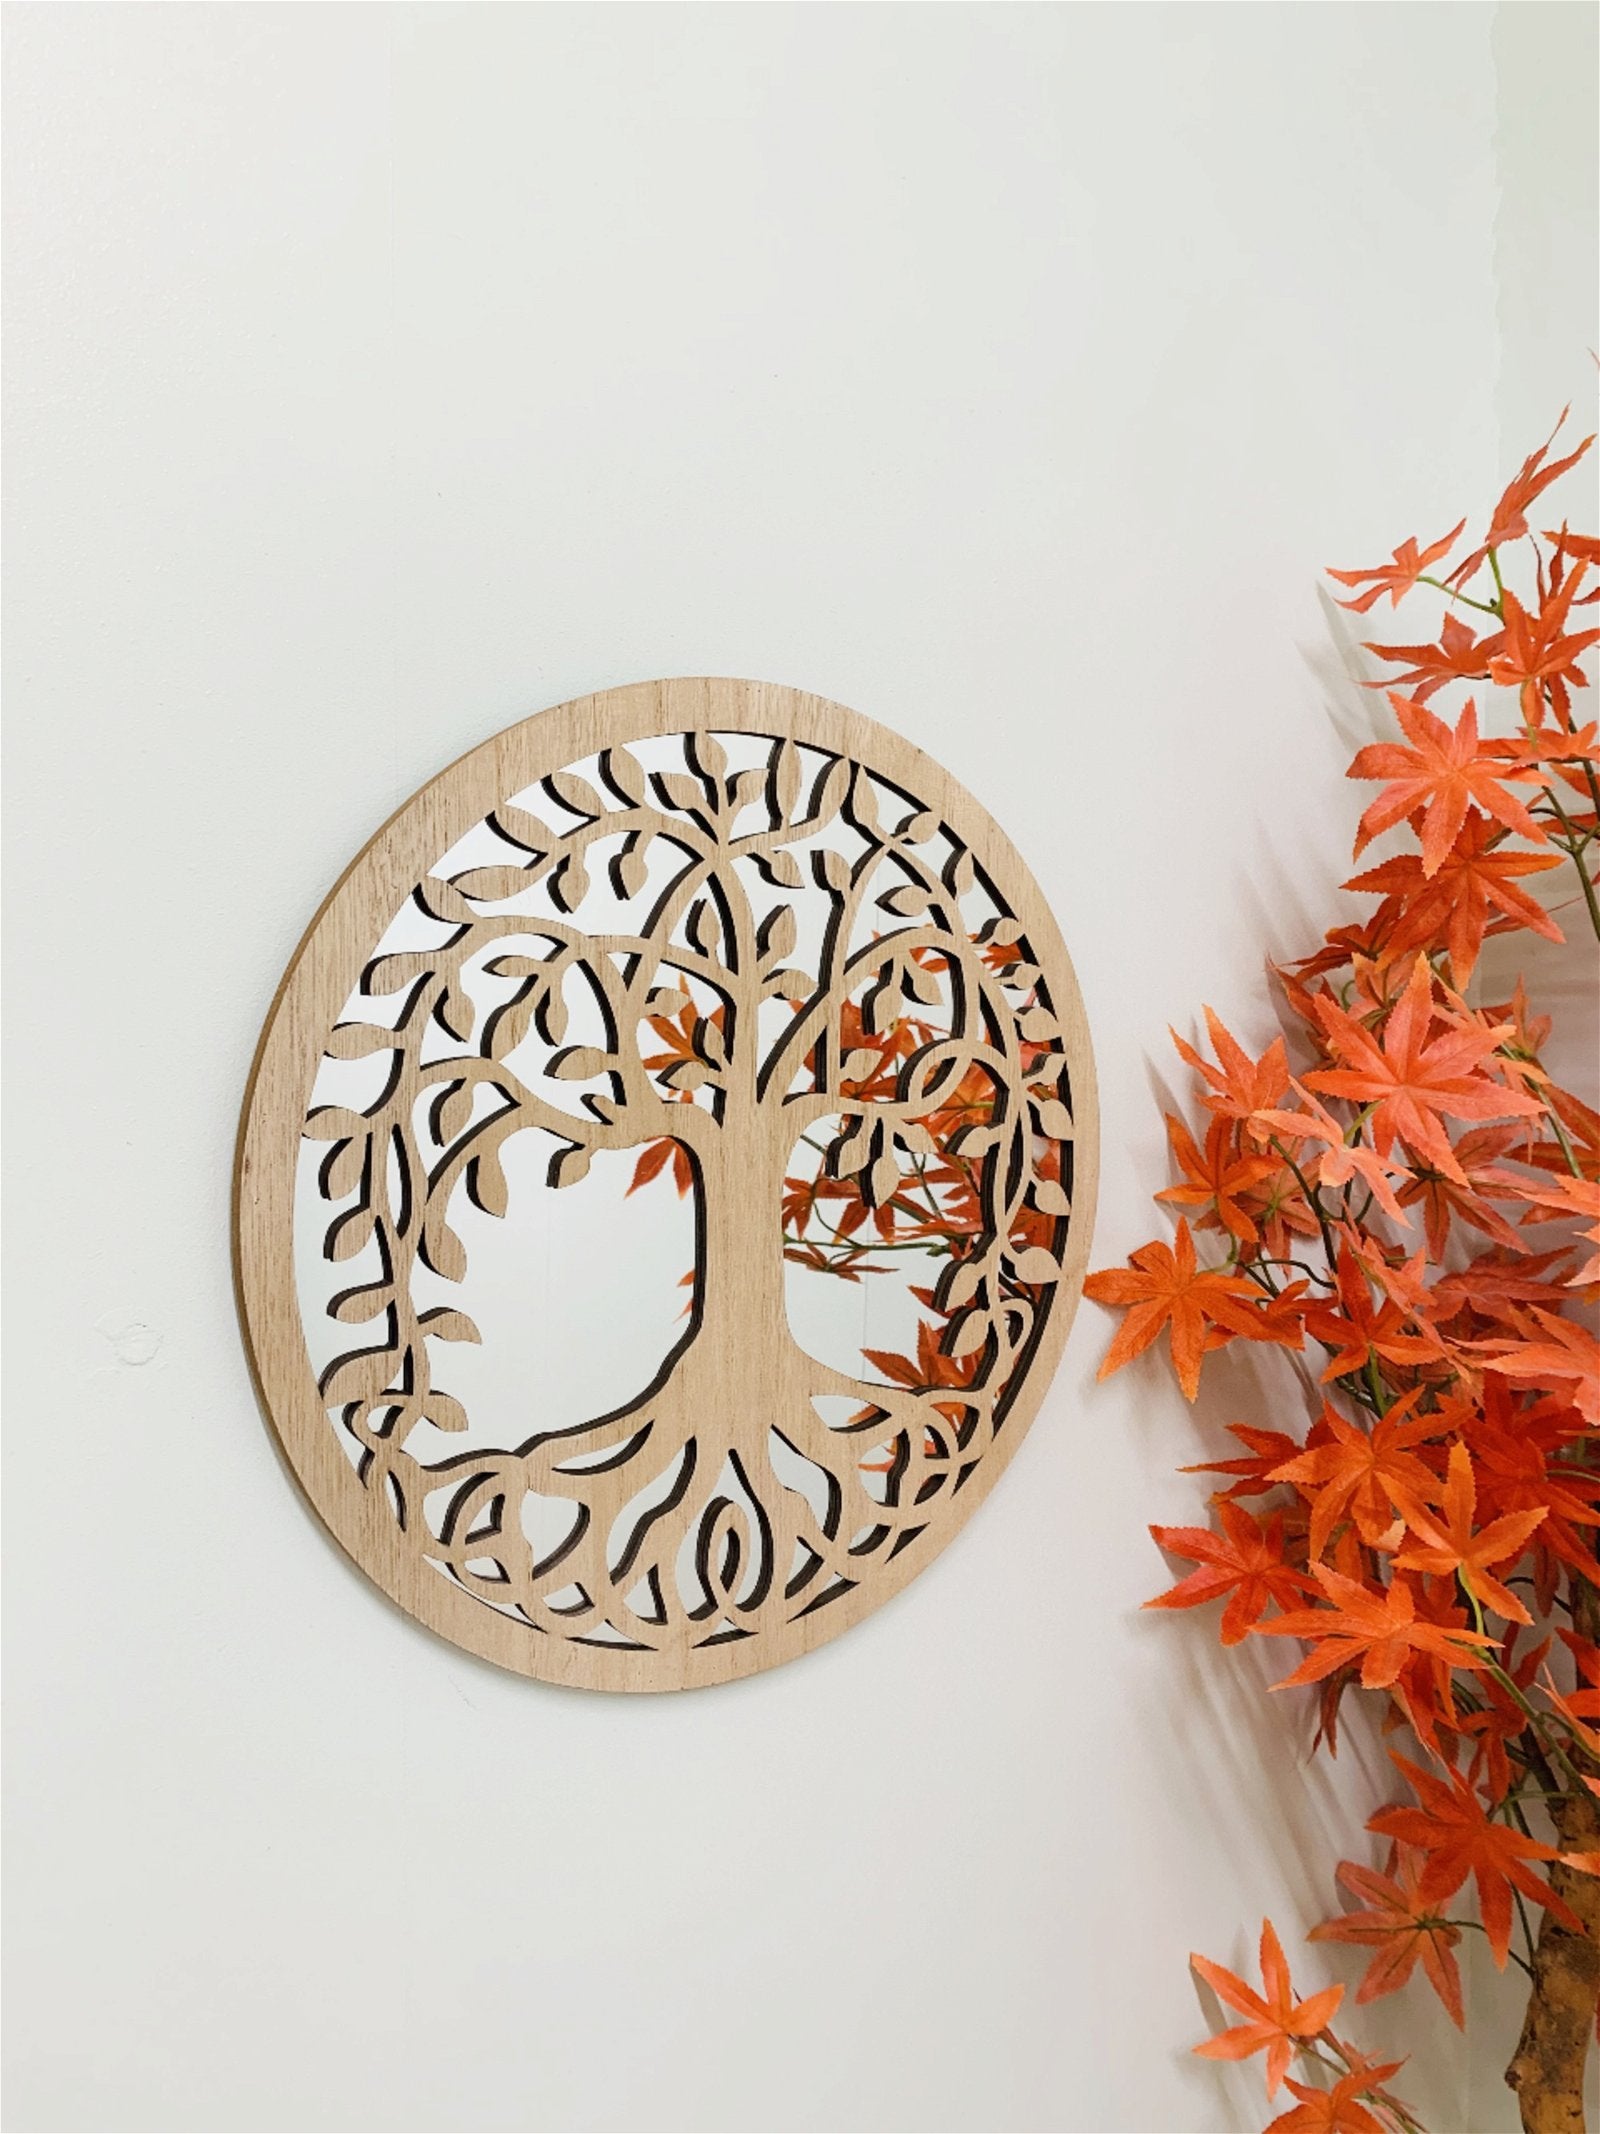 Round Cut Out Tree Of Life Mirror 35cm - Kaftan direct